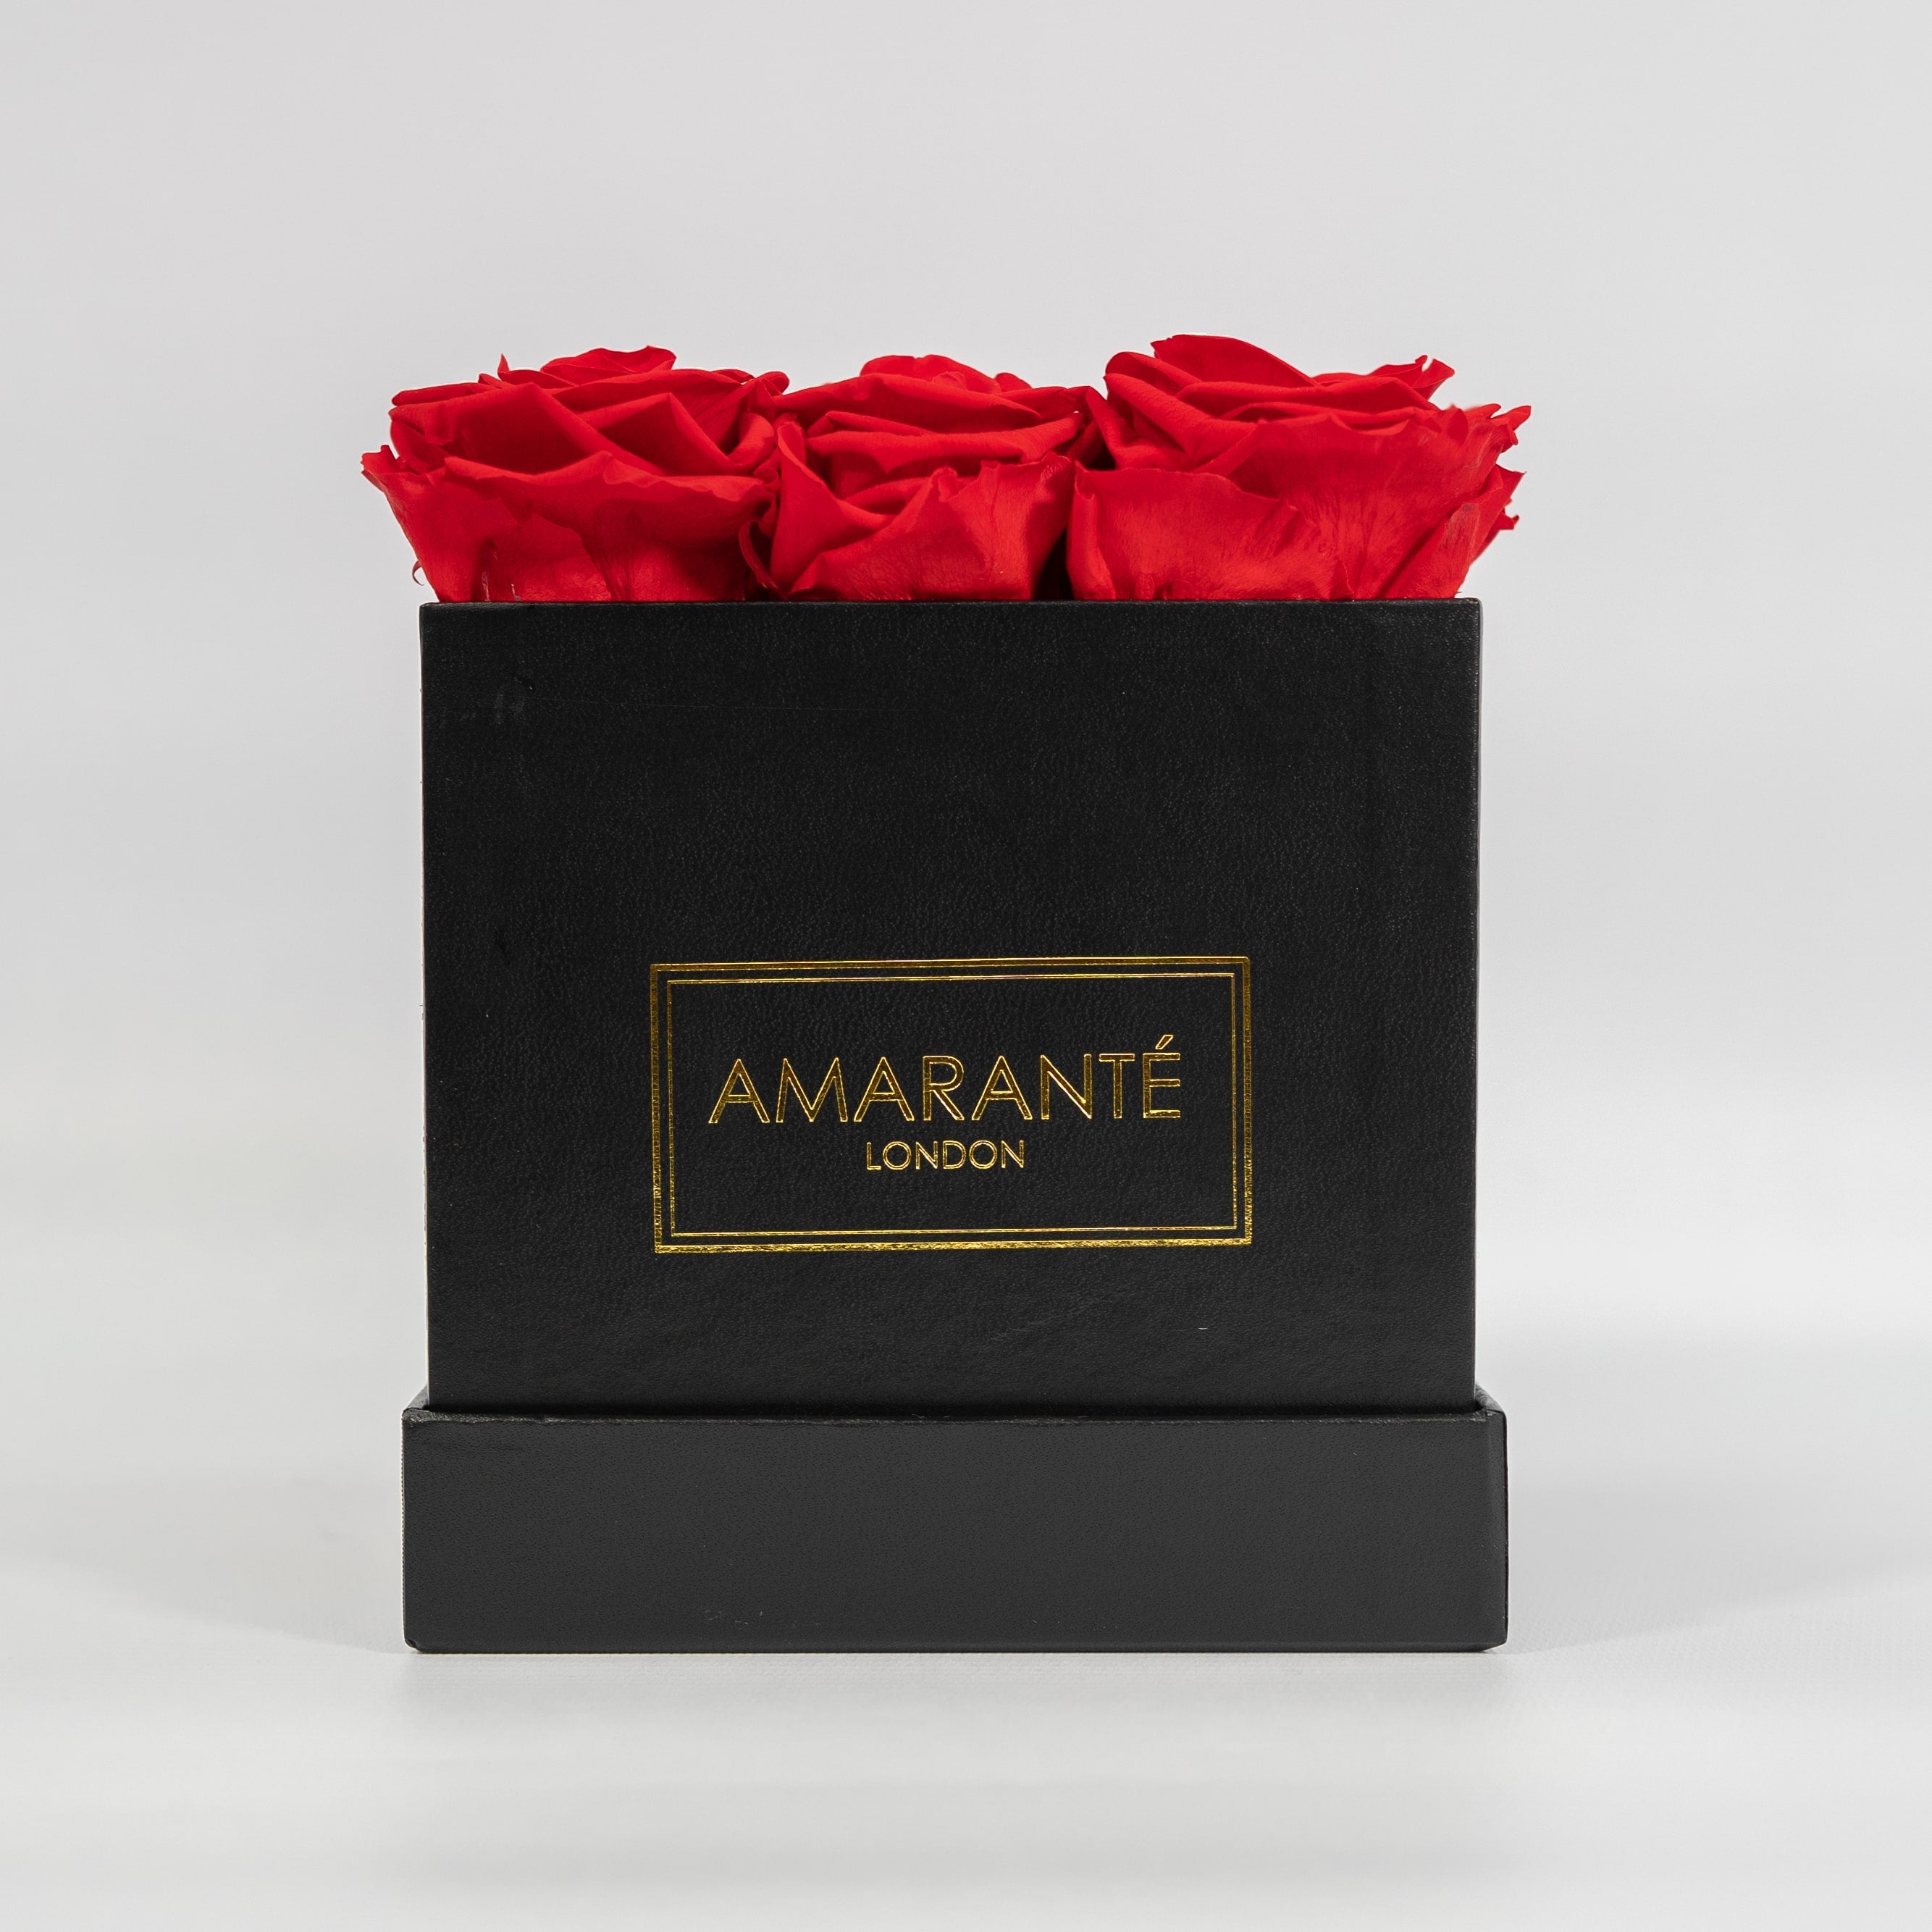 Dreamy red roses connoting love and romance 